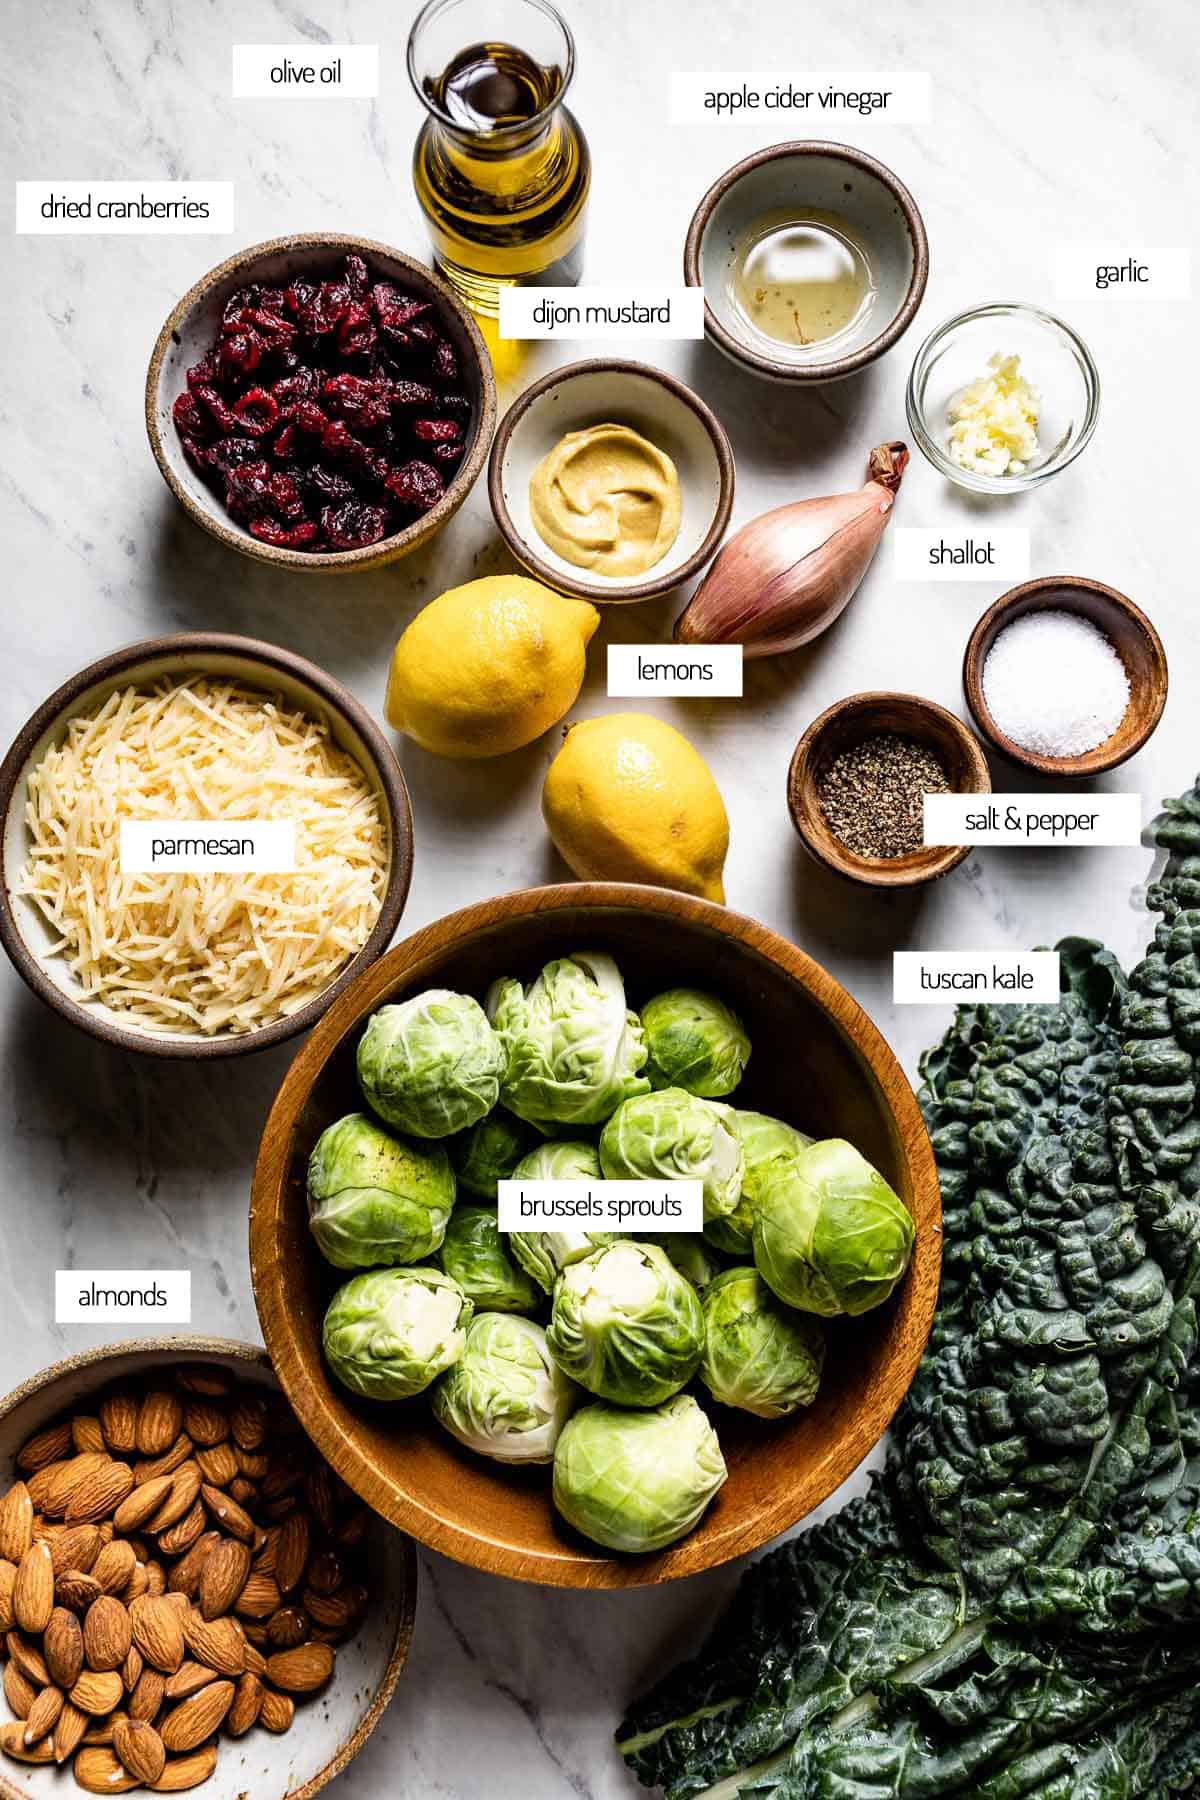 ingredients for a kale salad with Brussels sprouts from the top view.